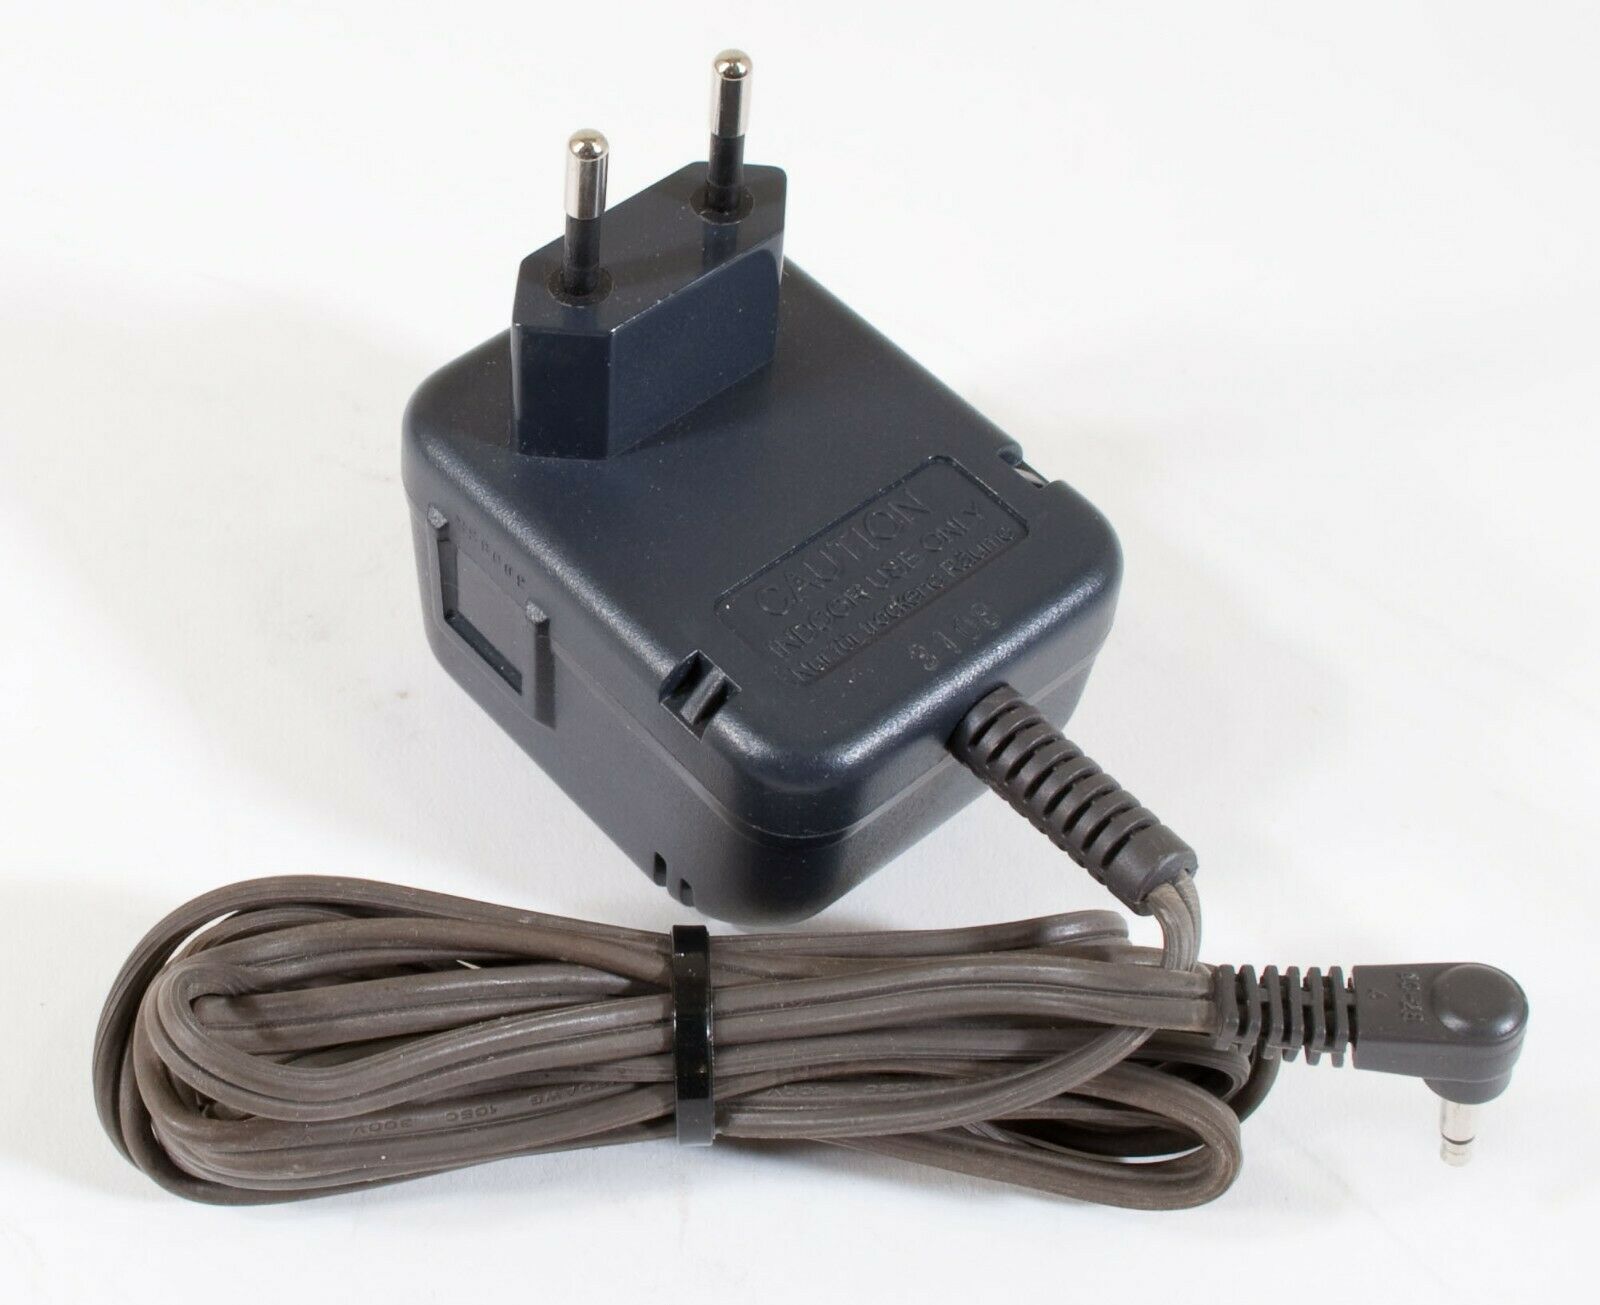 NEW WOOLWORTHS CHARGER MEC-A6150 12V 400mA USA UK EU PLUG power cord MPN: Does Not Apply Brand: WOOLWORTHS Compatible